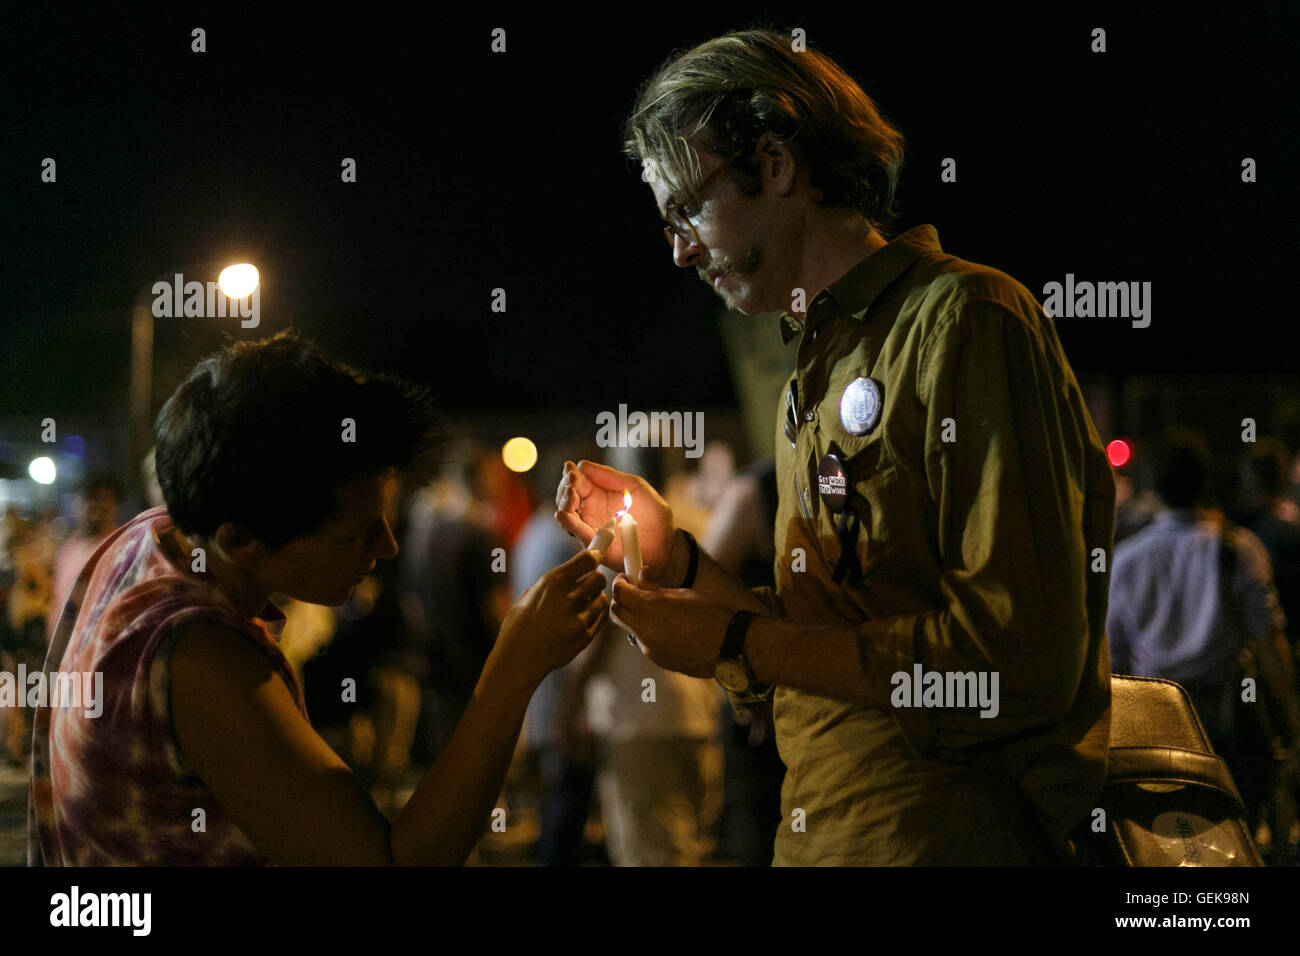 Philadelphia, Pennsylvania, USA. 26th July, 2016. Democratic National Convention. Wes Schnitker from St. Louis helps another Bernie Sanders supporter light a candle outside the DNC on July 26th, 2016. Credit:  John Orvis/Alamy Live News Stock Photo